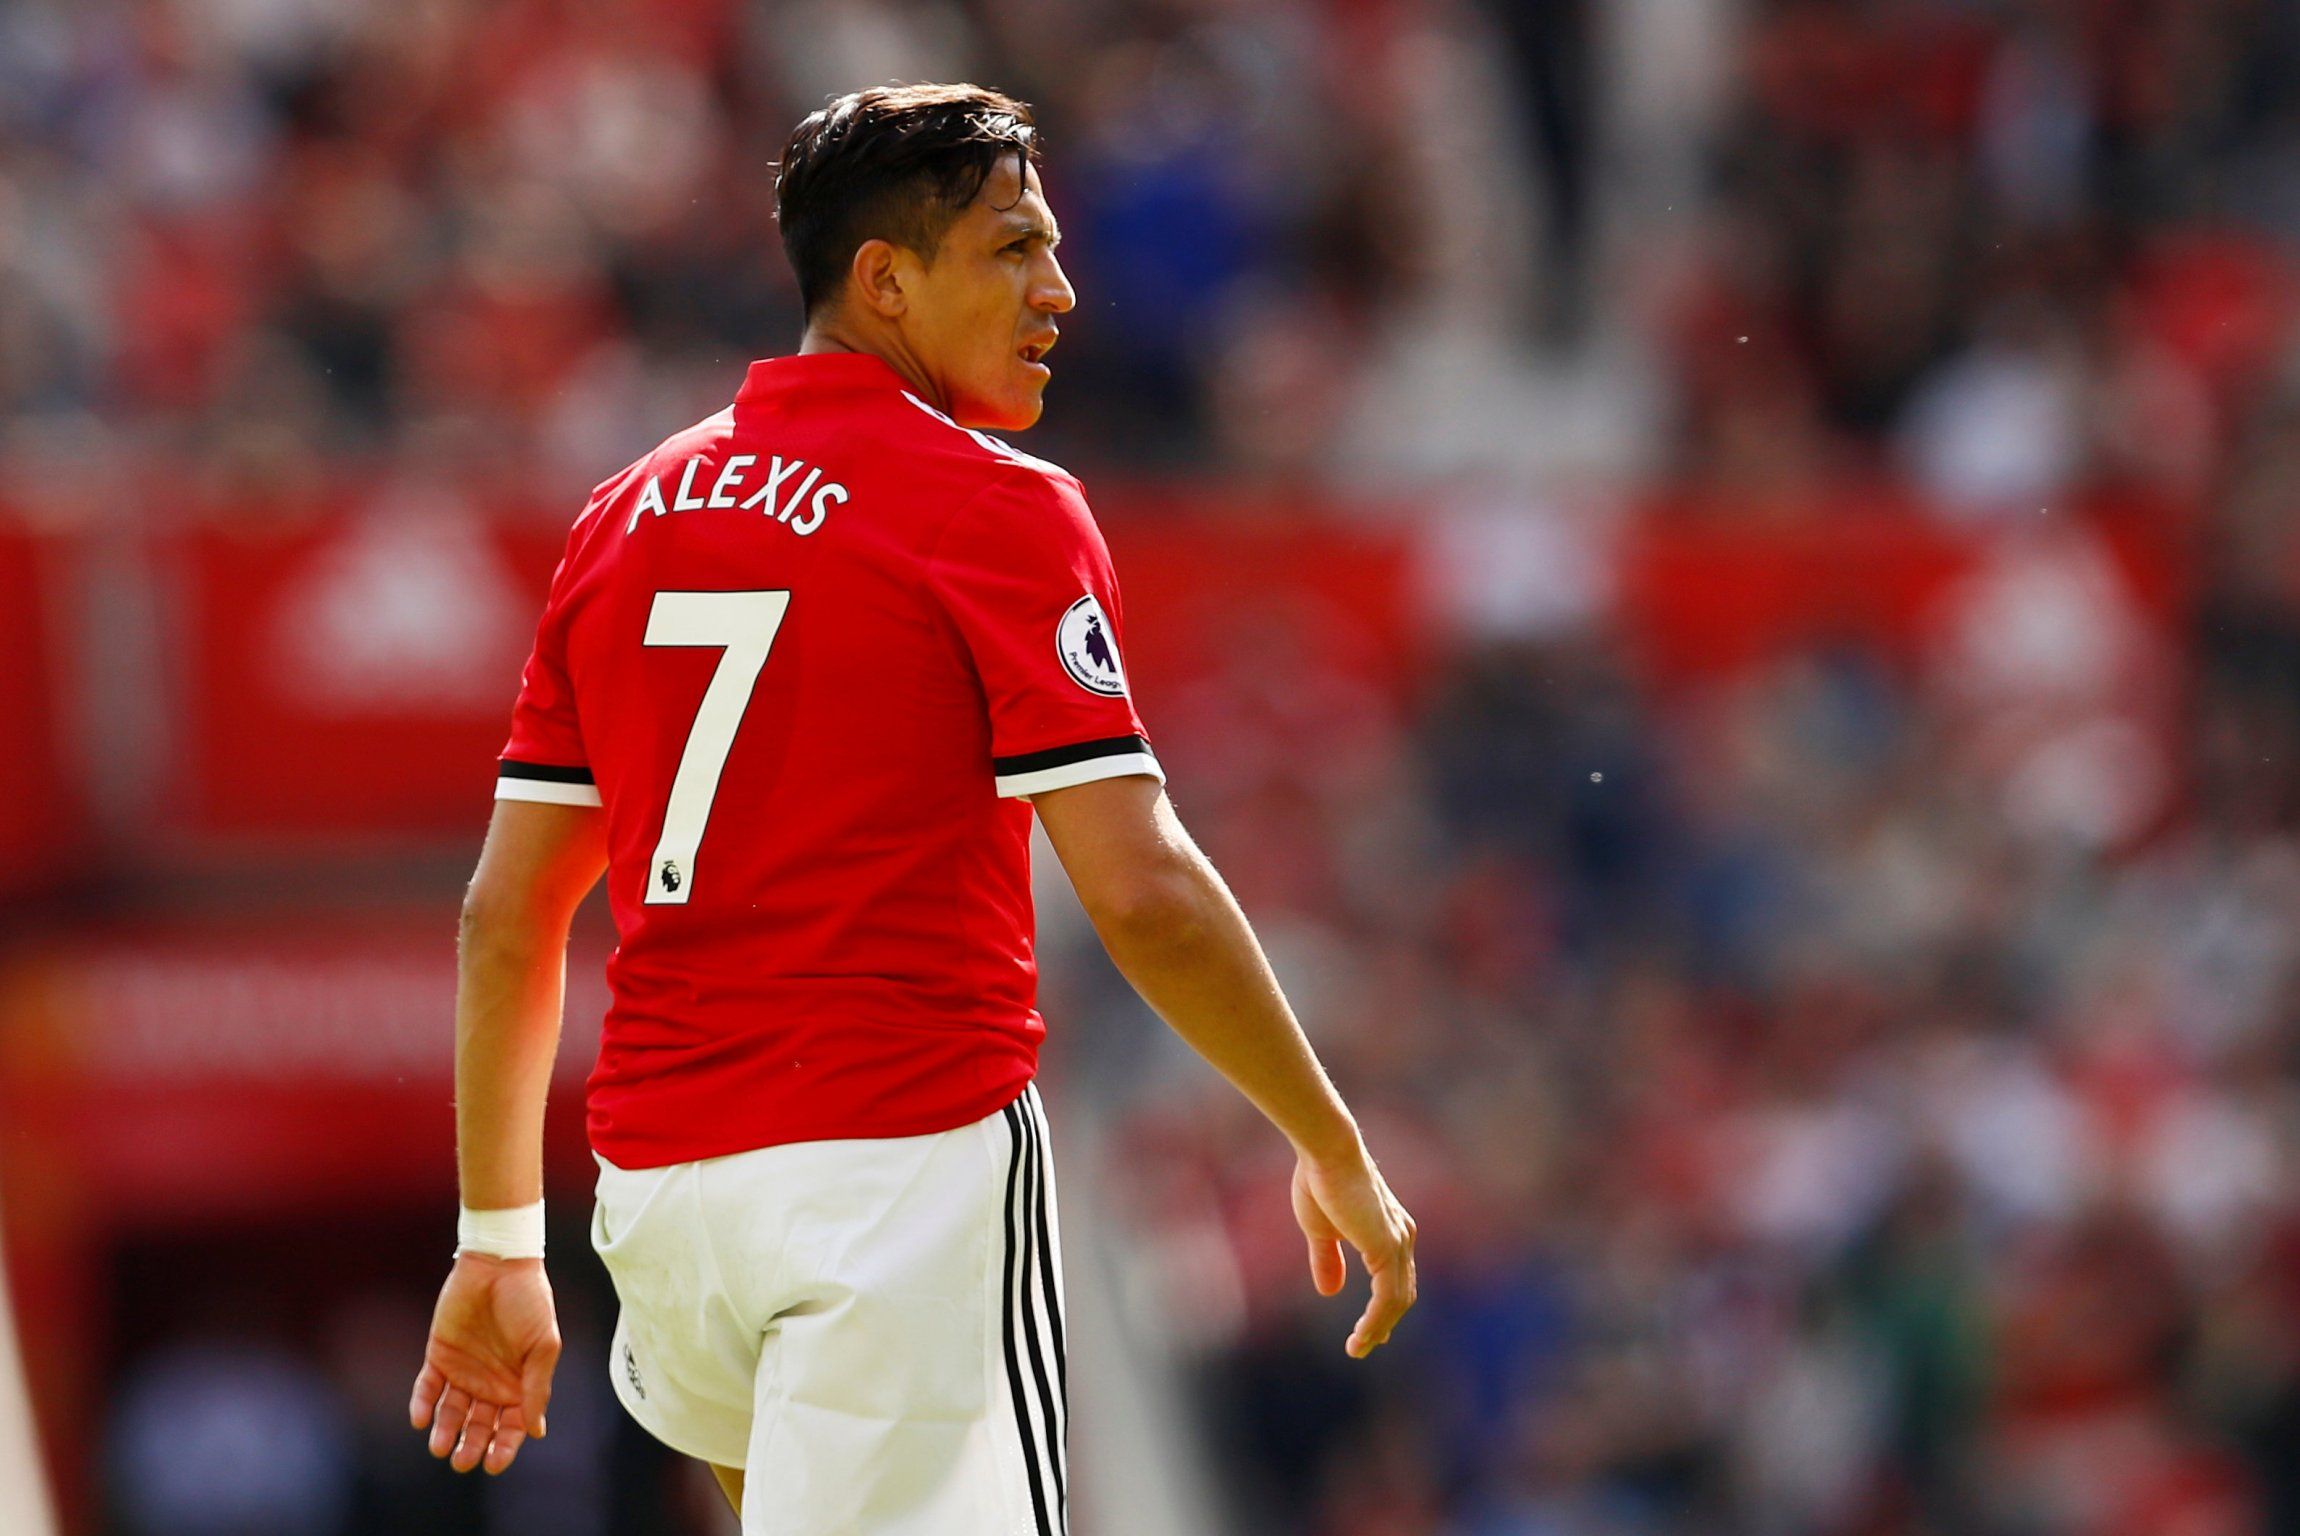 Alexis Sanchez in action for Manchester United